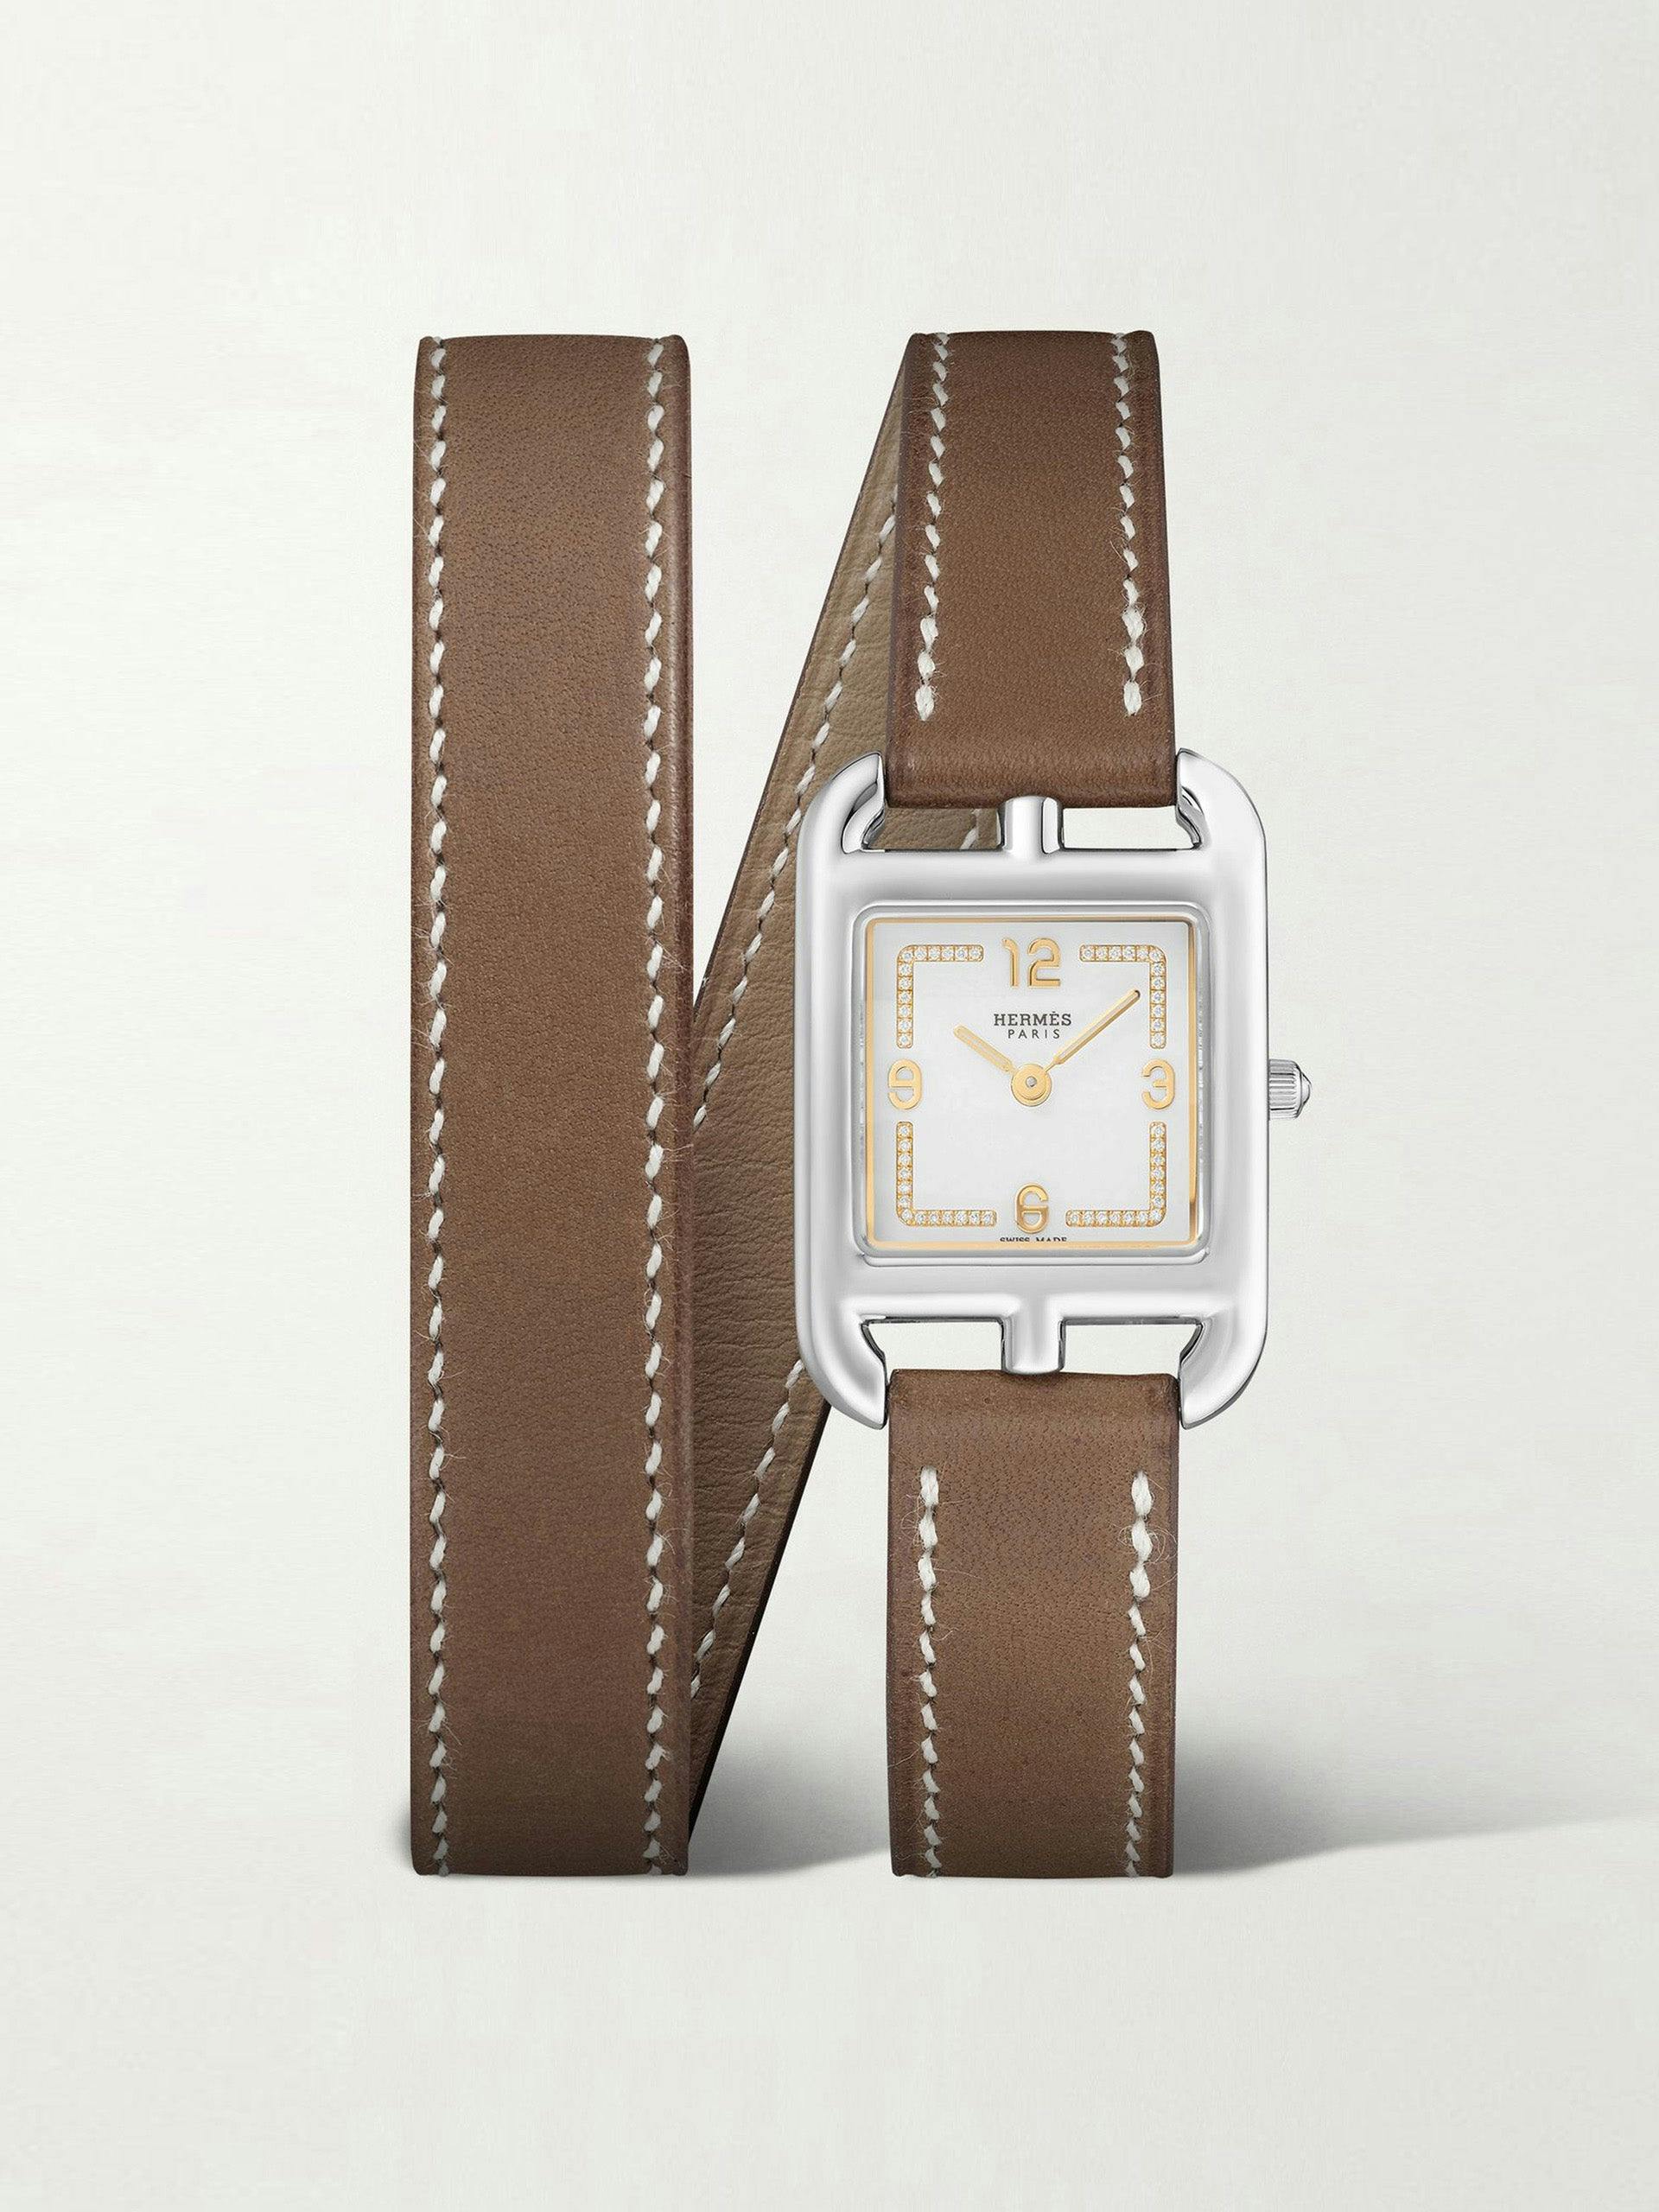 Wrap around leather, diamond and stainless steel watch